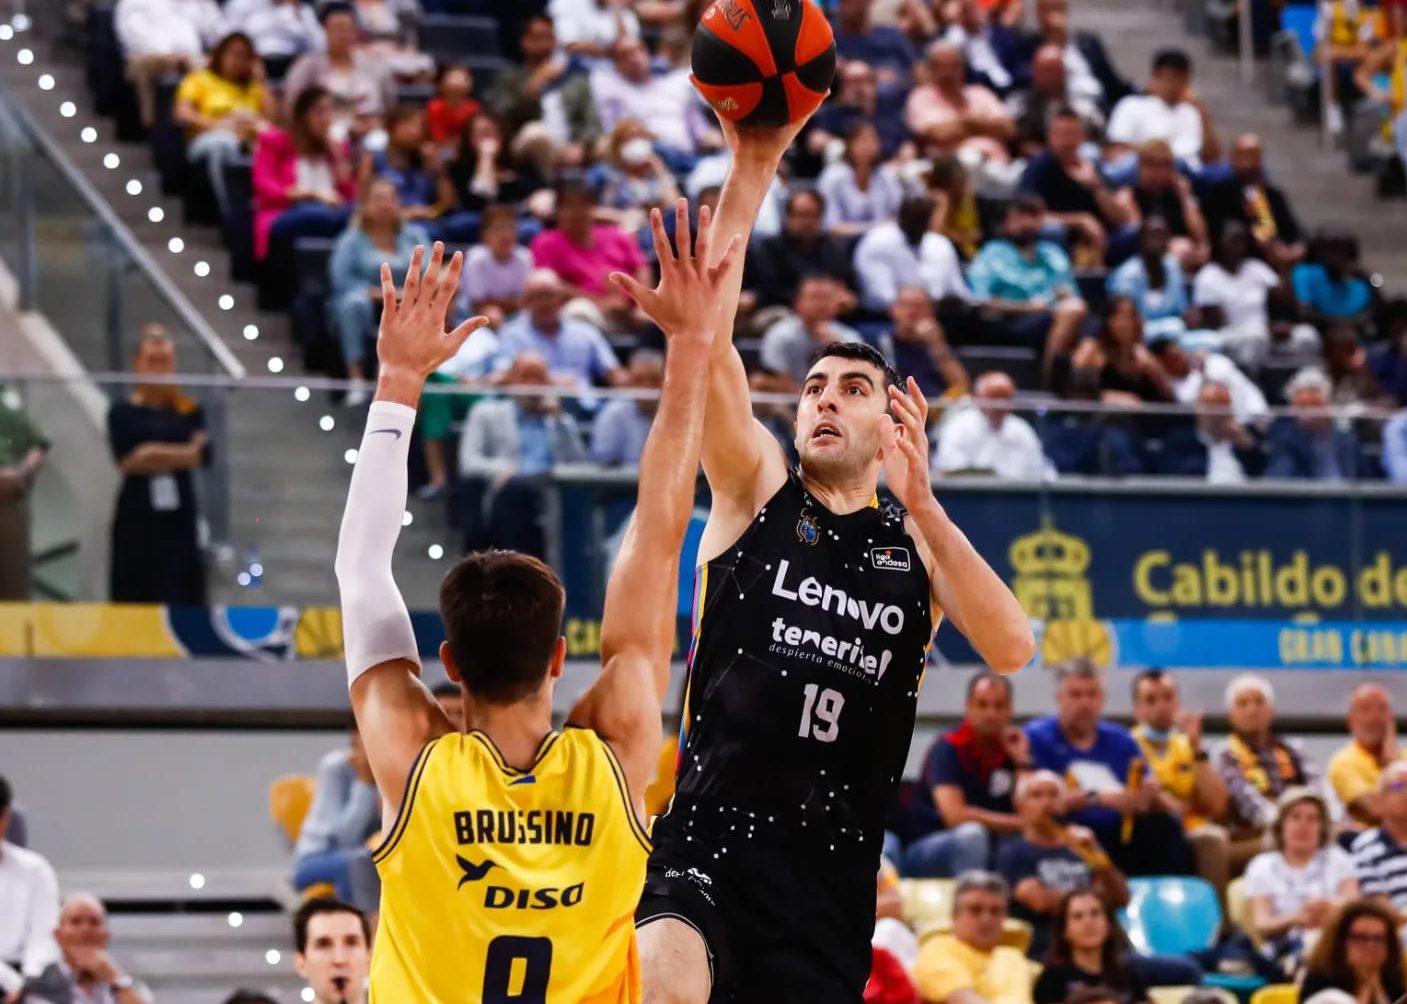 19 points and MVP title in canarian Derby by Shermadini